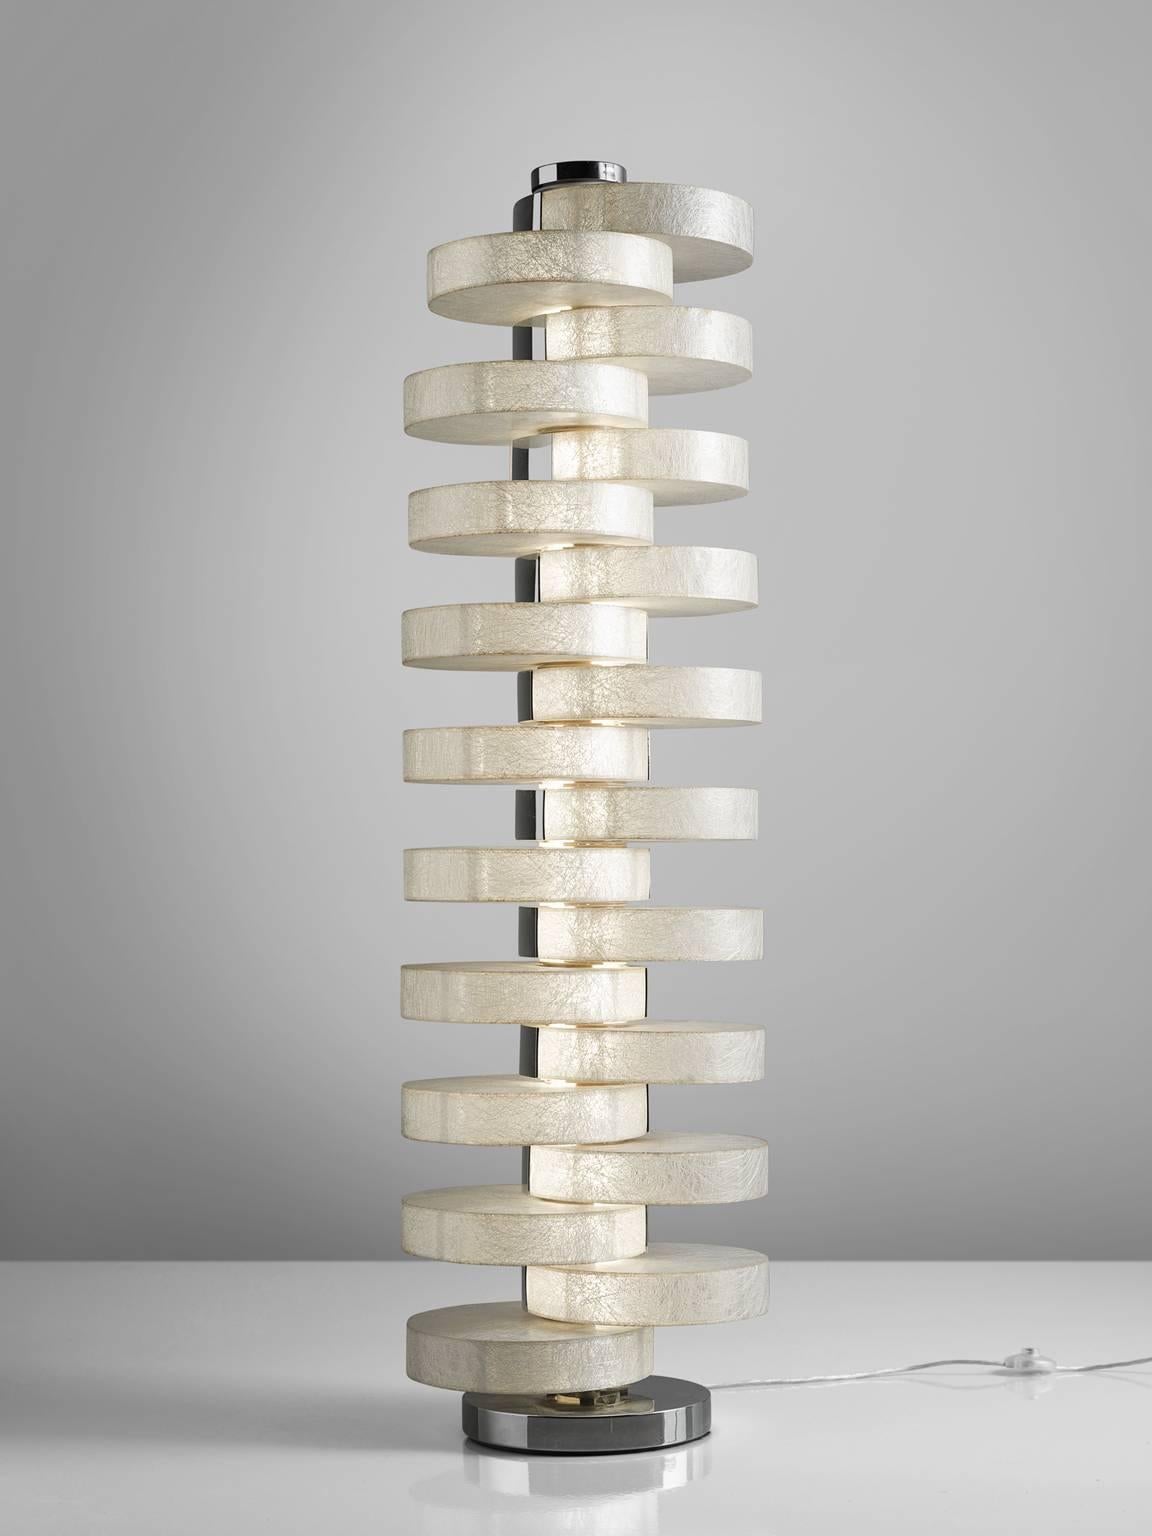 Floor lamp, fiberglass, metal, Italy, 1970s.

This floor lamp holds twenty, thick circular fiberglas circles that are stacked on top of one another. The circles are only stacked on the sides by means of which a very playful pattern is created. The